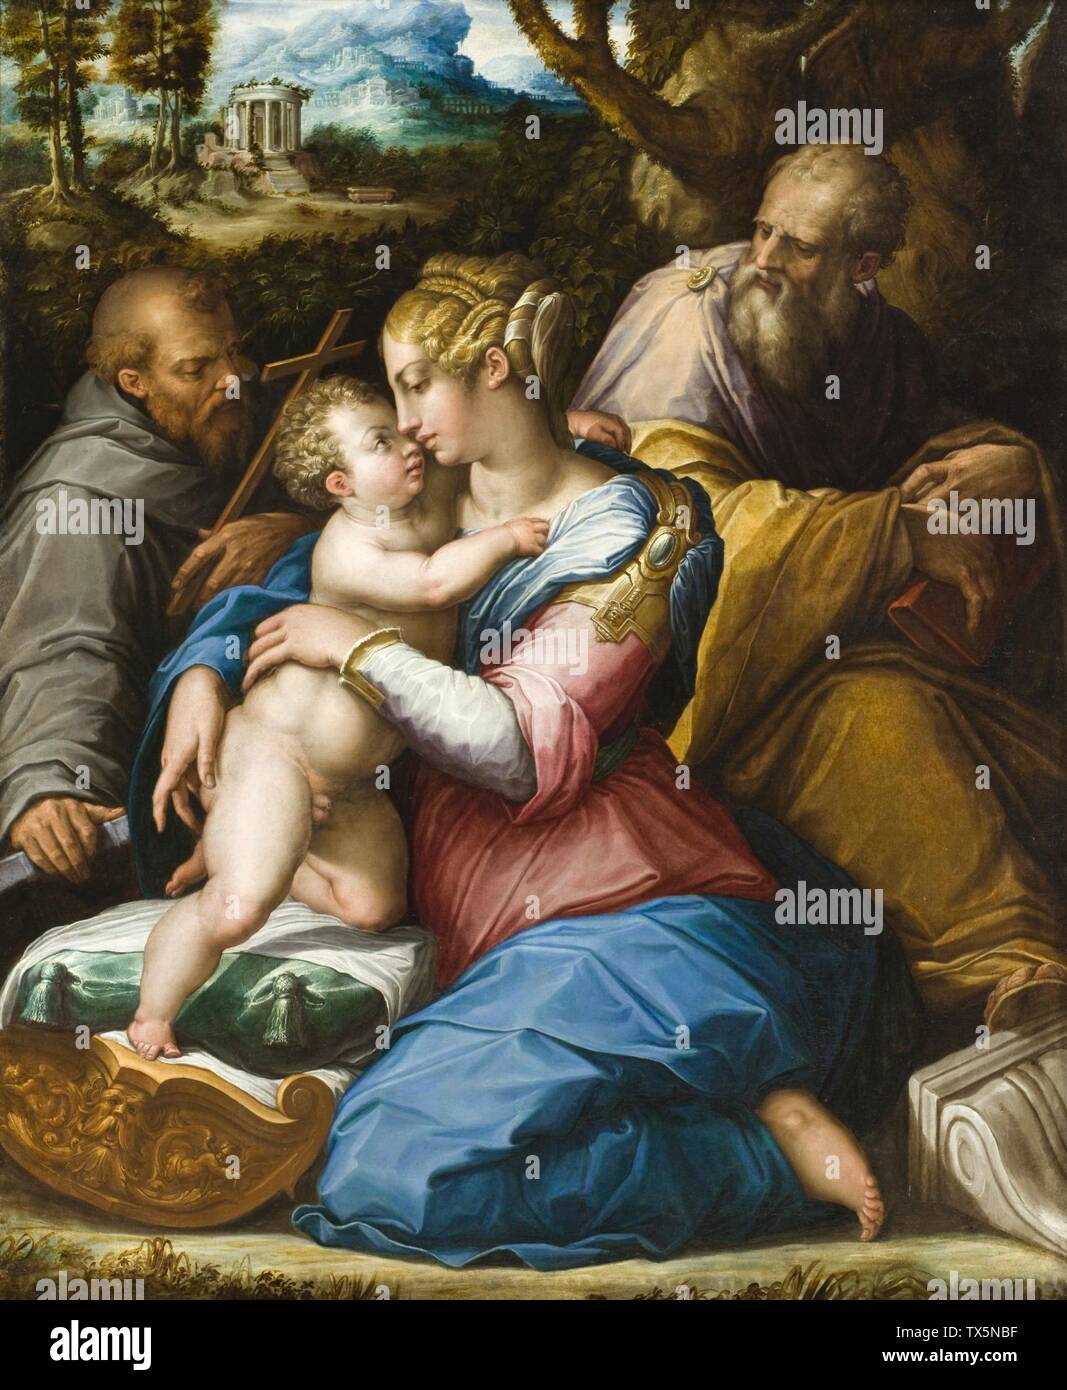 Holy Family with Saint Francis in a Landscape;  Italy, 1542 Oil on canvas Gift of The Ahmanson Foundation (M.87.87) European Painting Currently on public view: Ahmanson Building, floor 3; 1542date QS:P571,+1542-00-00T00:00:00Z/9; Stock Photo